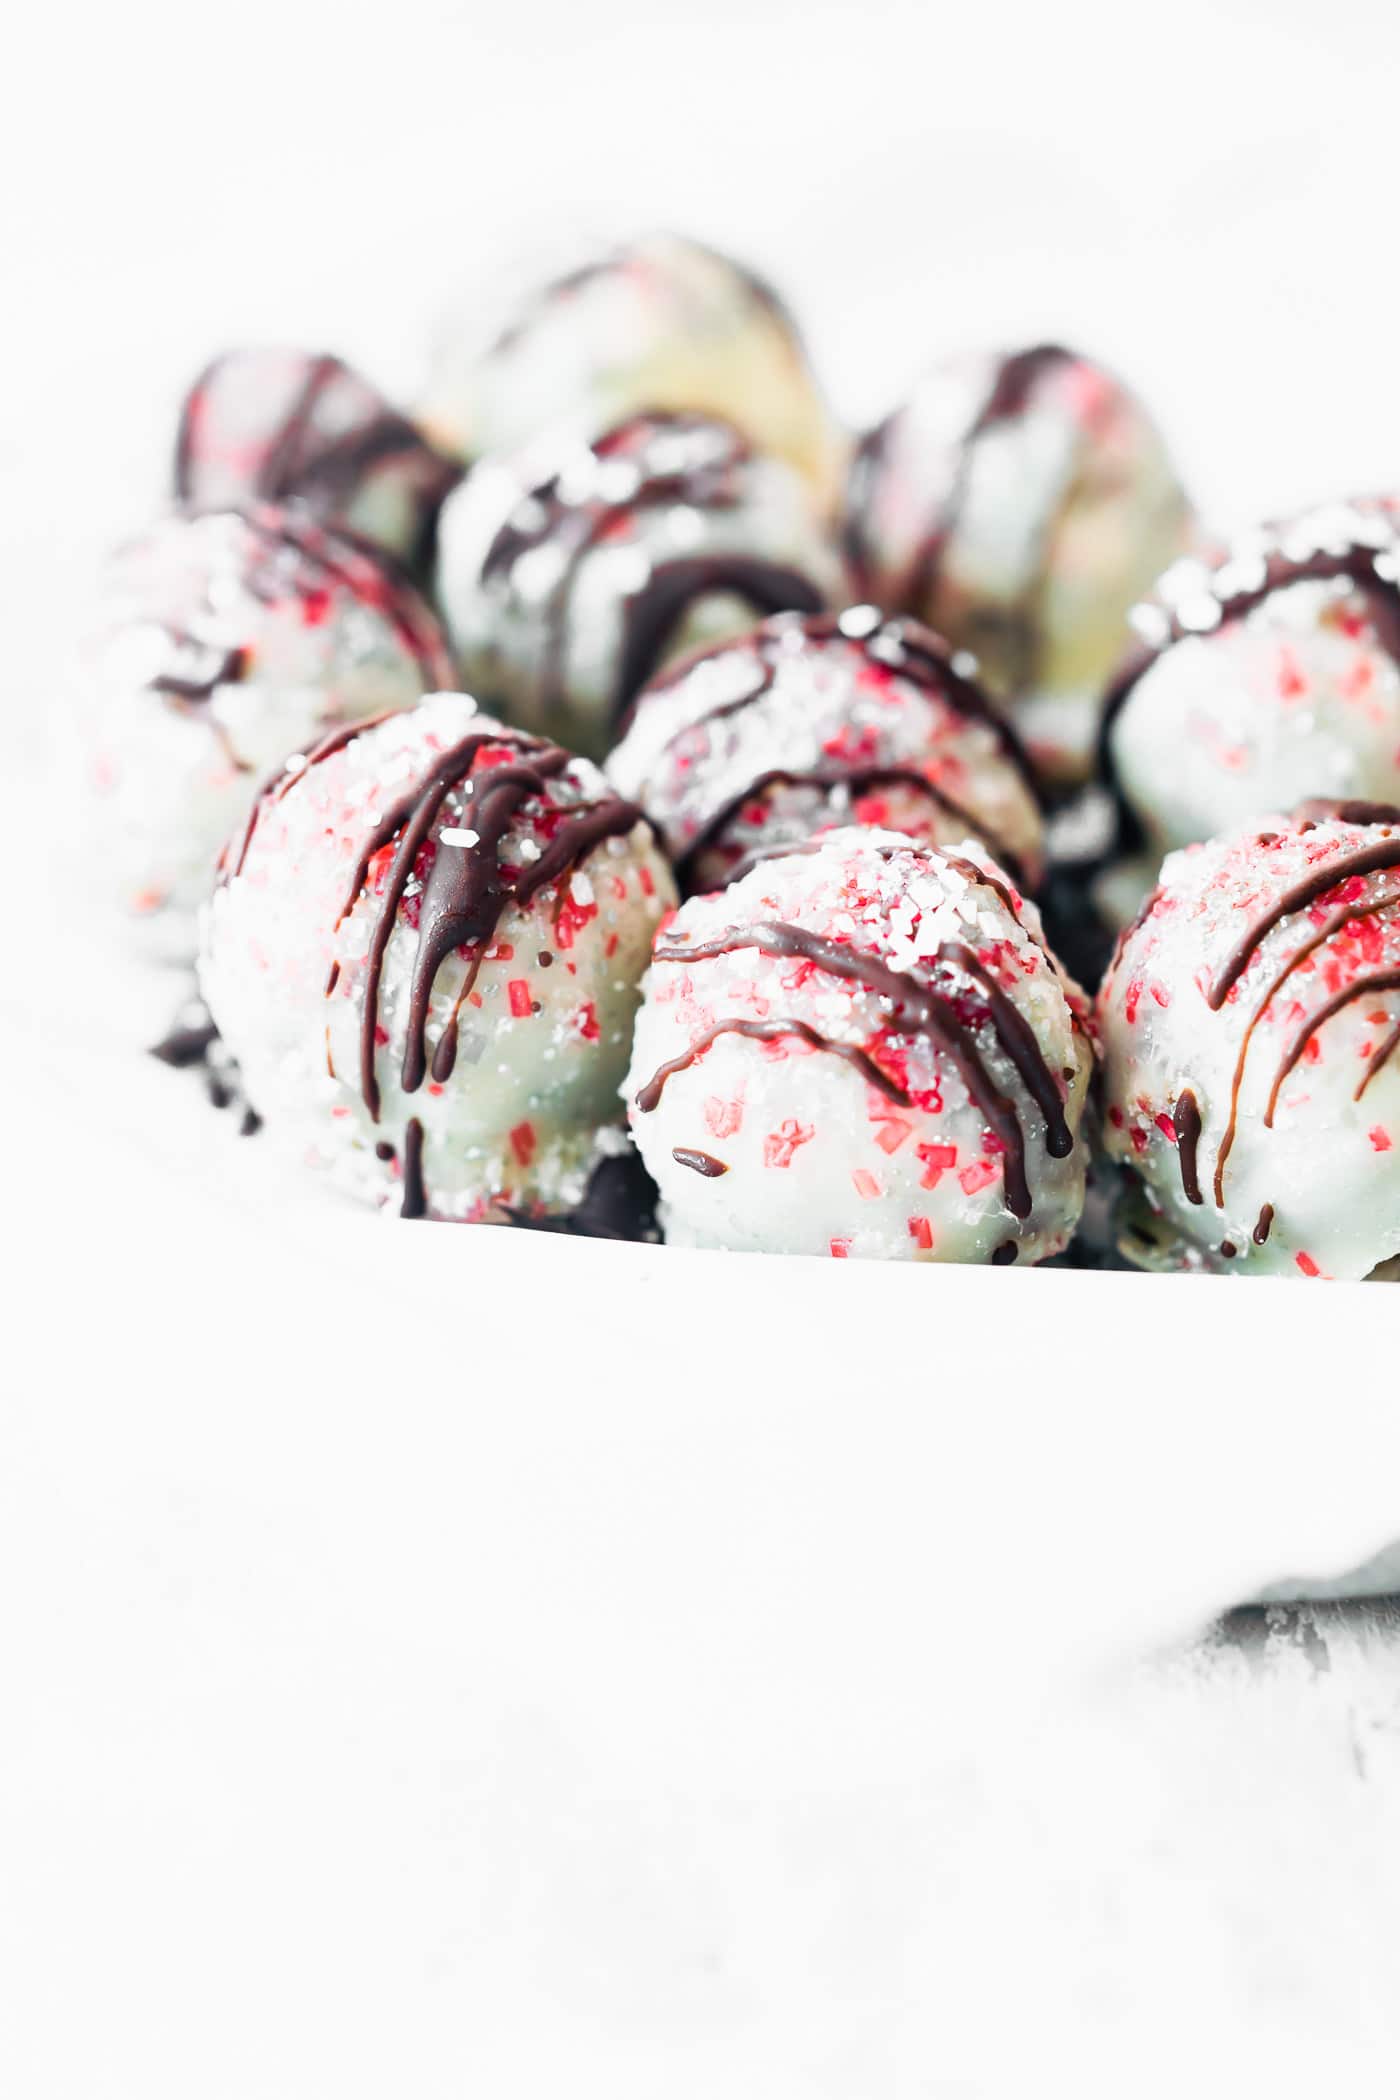 White Chocolate Peppermint Rum Balls for easy no bake Holiday dessert! This quick festive dessert made with gluten free ingredients. Non alcoholic version option too! 